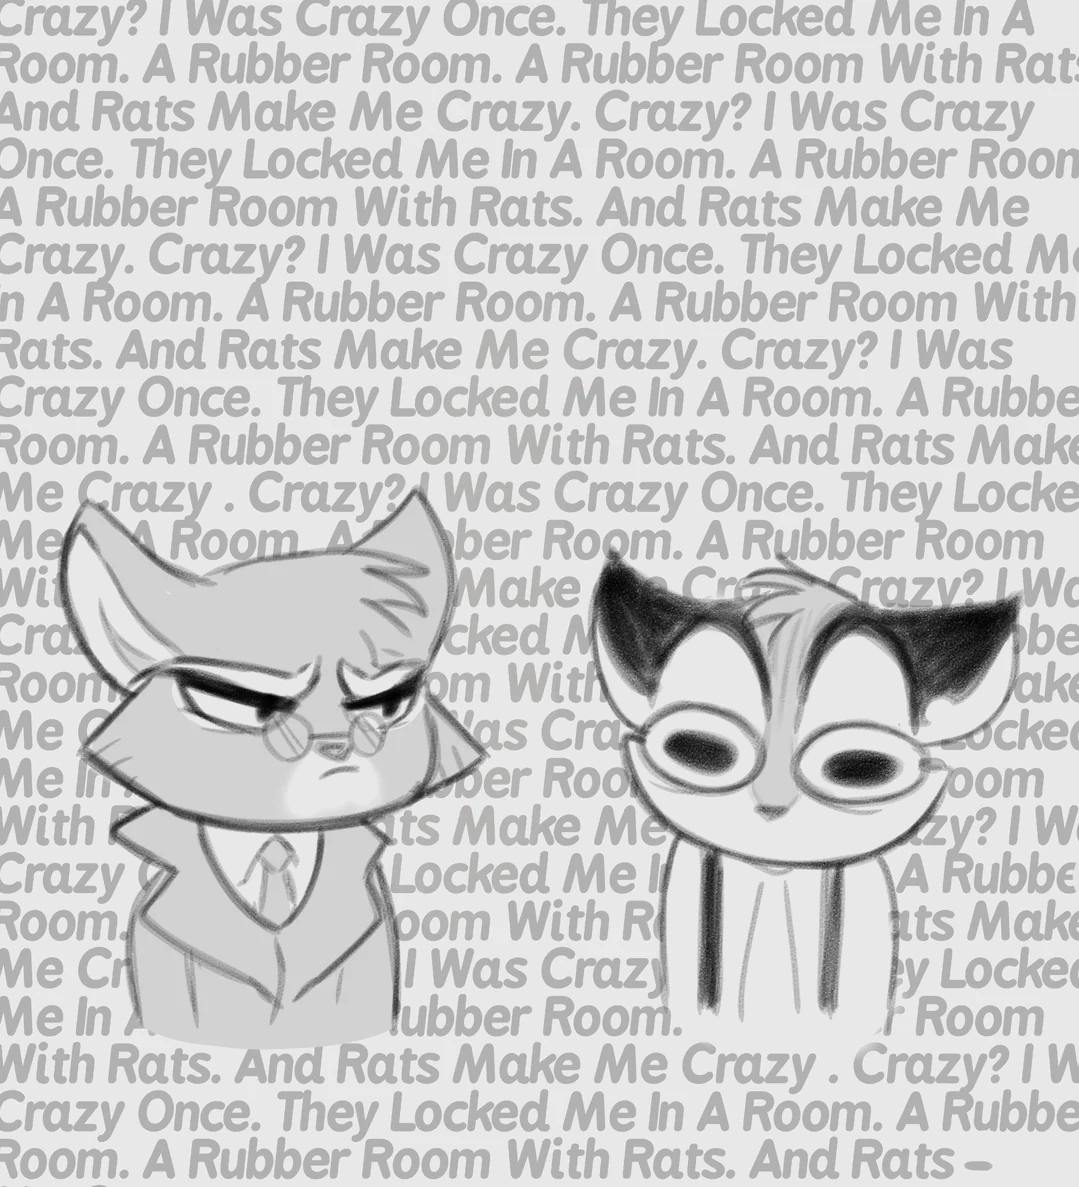 Two cartoon characters with the I was crazy once poem in text over and over in the background.